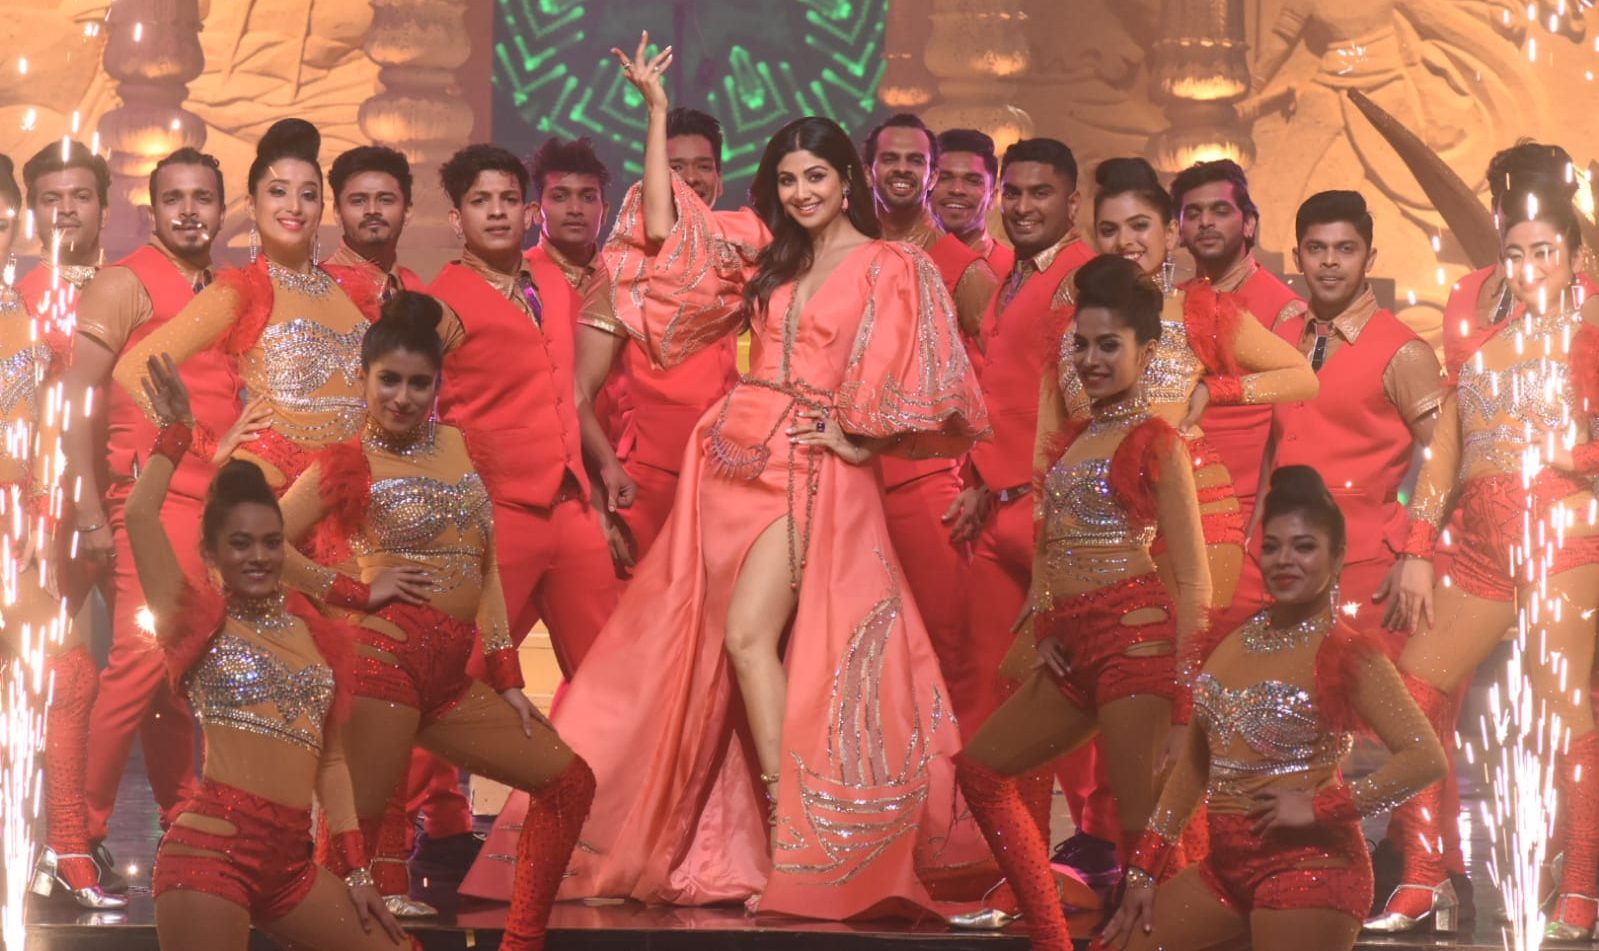 At the Grand Finale of India’s Got Talent this Sunday, Shilpa Shetty Kundra is all ready to steal hearts!